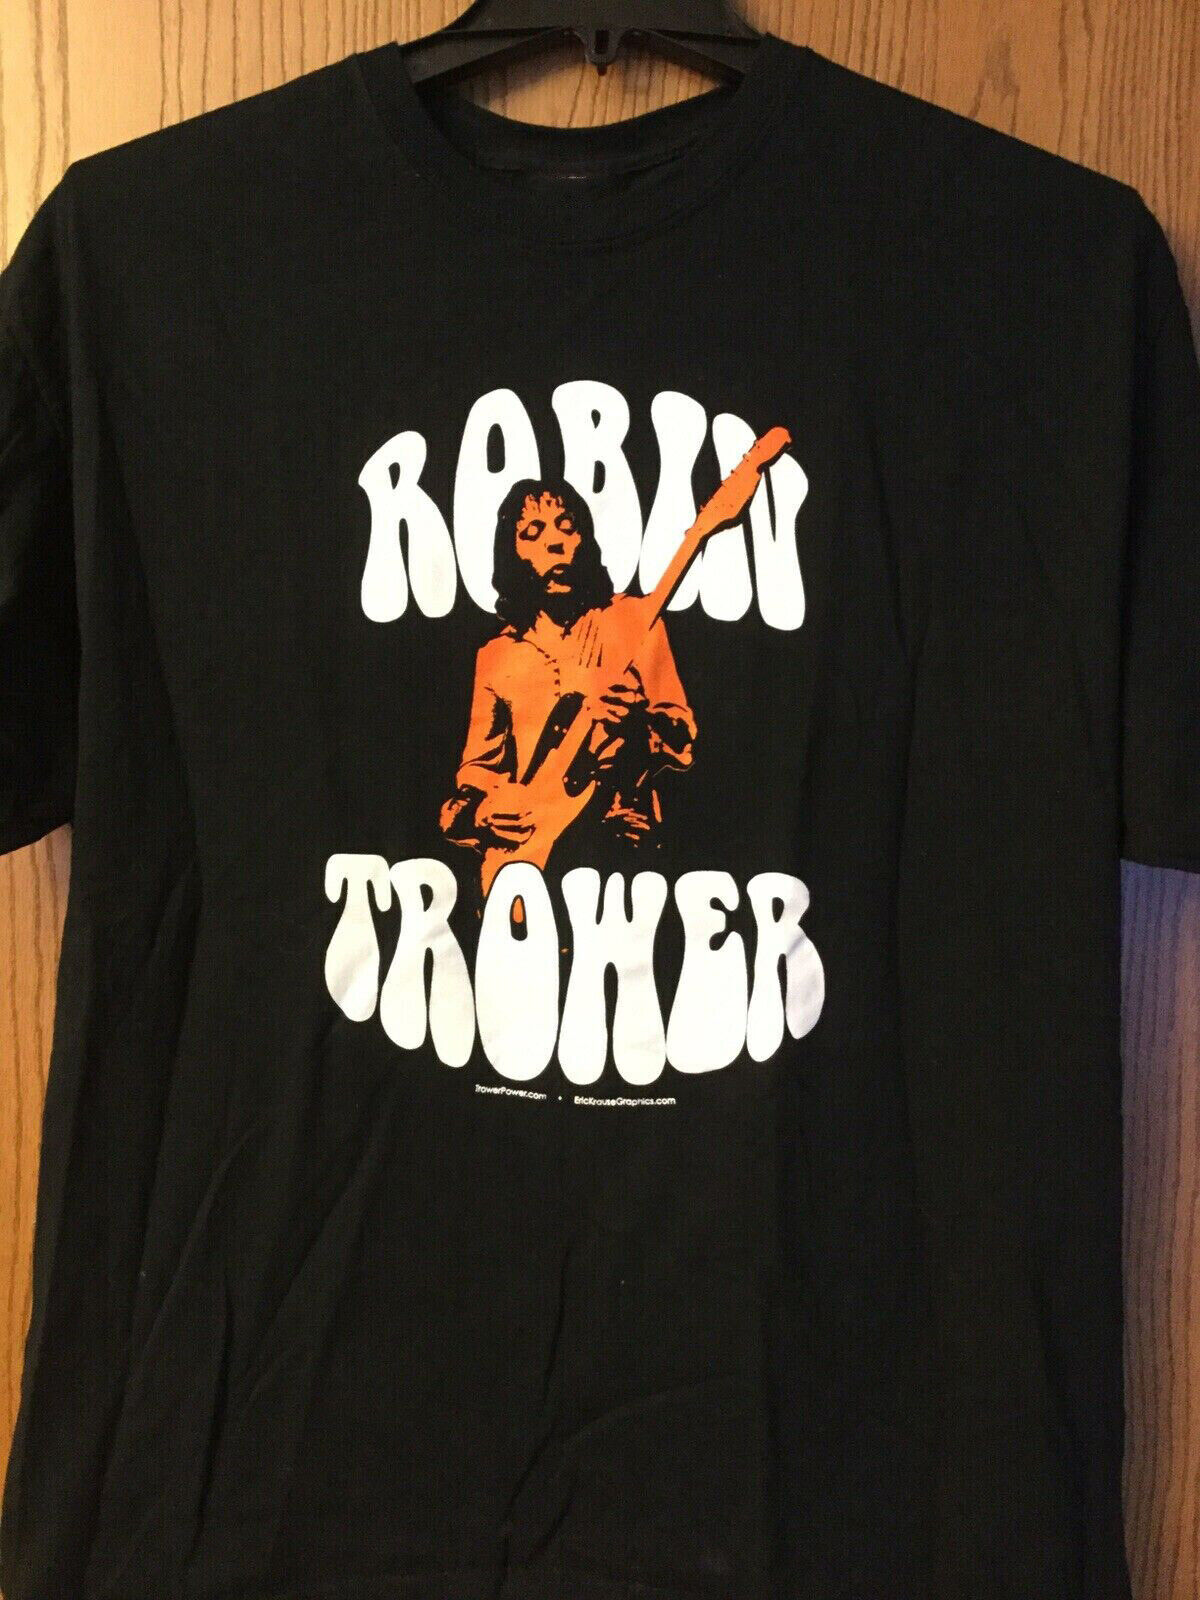 In Concert Robin Trower Tee Shirt Classic Black Men Size S-234XL LE247